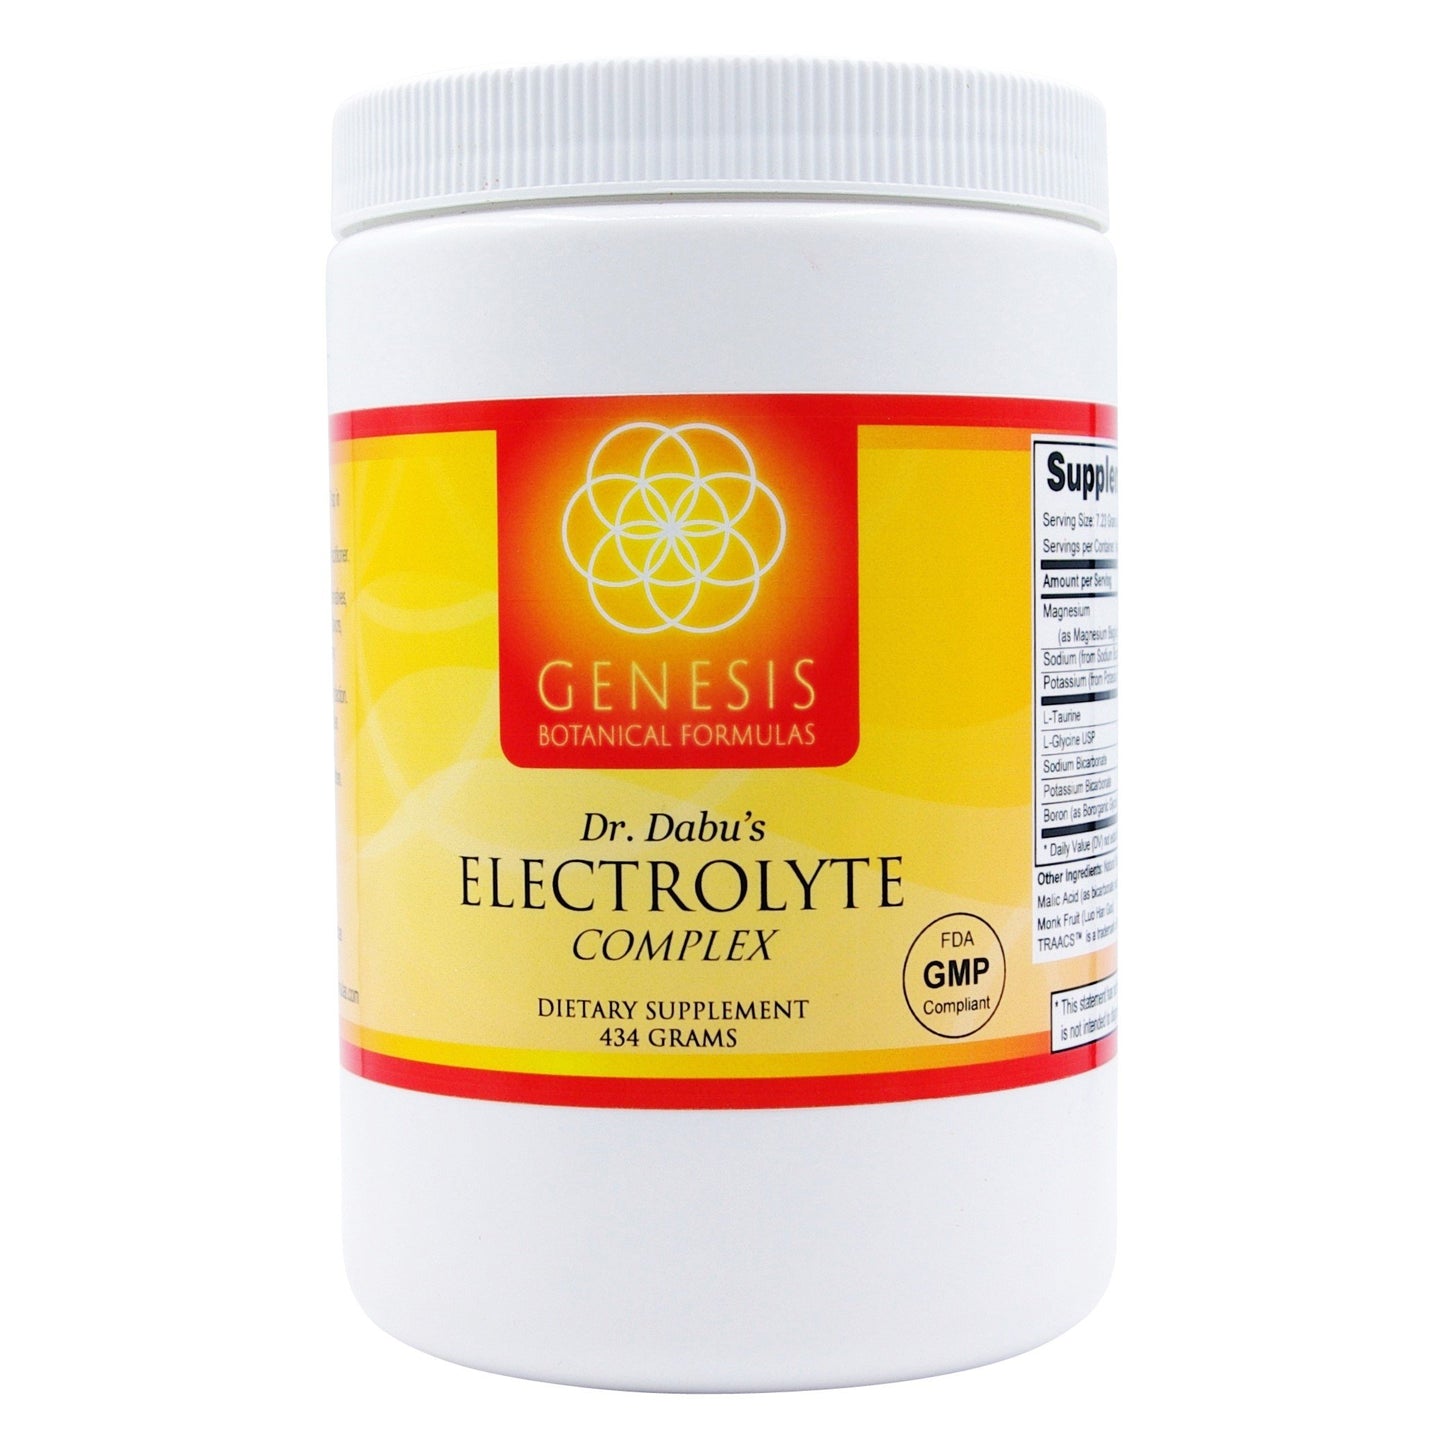 Doctor recommended Electrolyte natural supplement